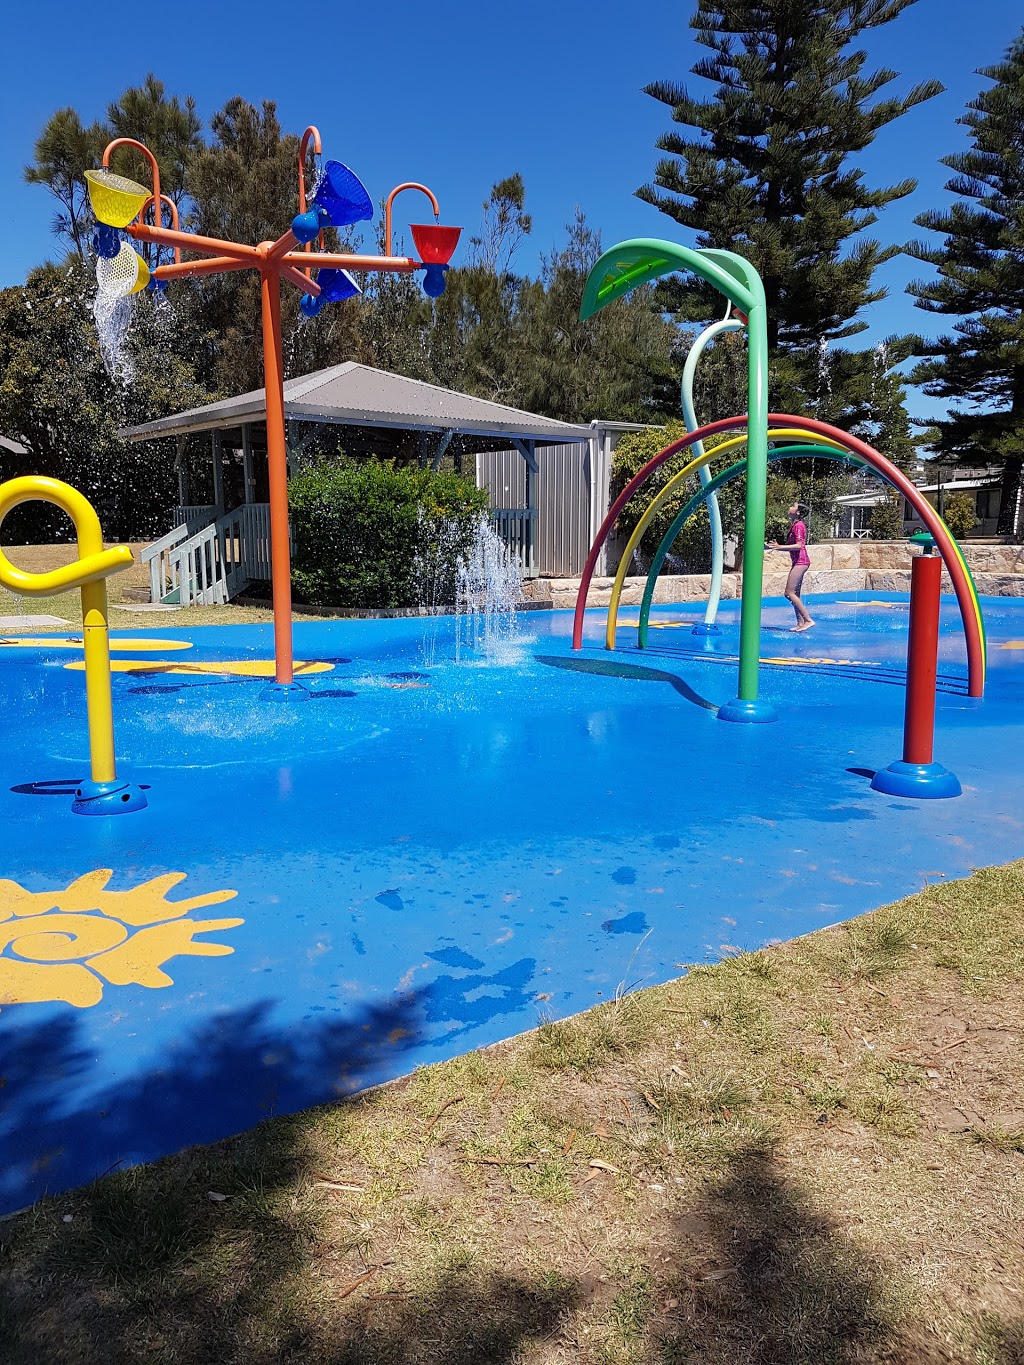 NRMA Sydney Lakeside Holiday Park | campground | 38 Lake Park Rd, North Narrabeen NSW 2101, Australia | 1800008845 OR +61 1800 008 845